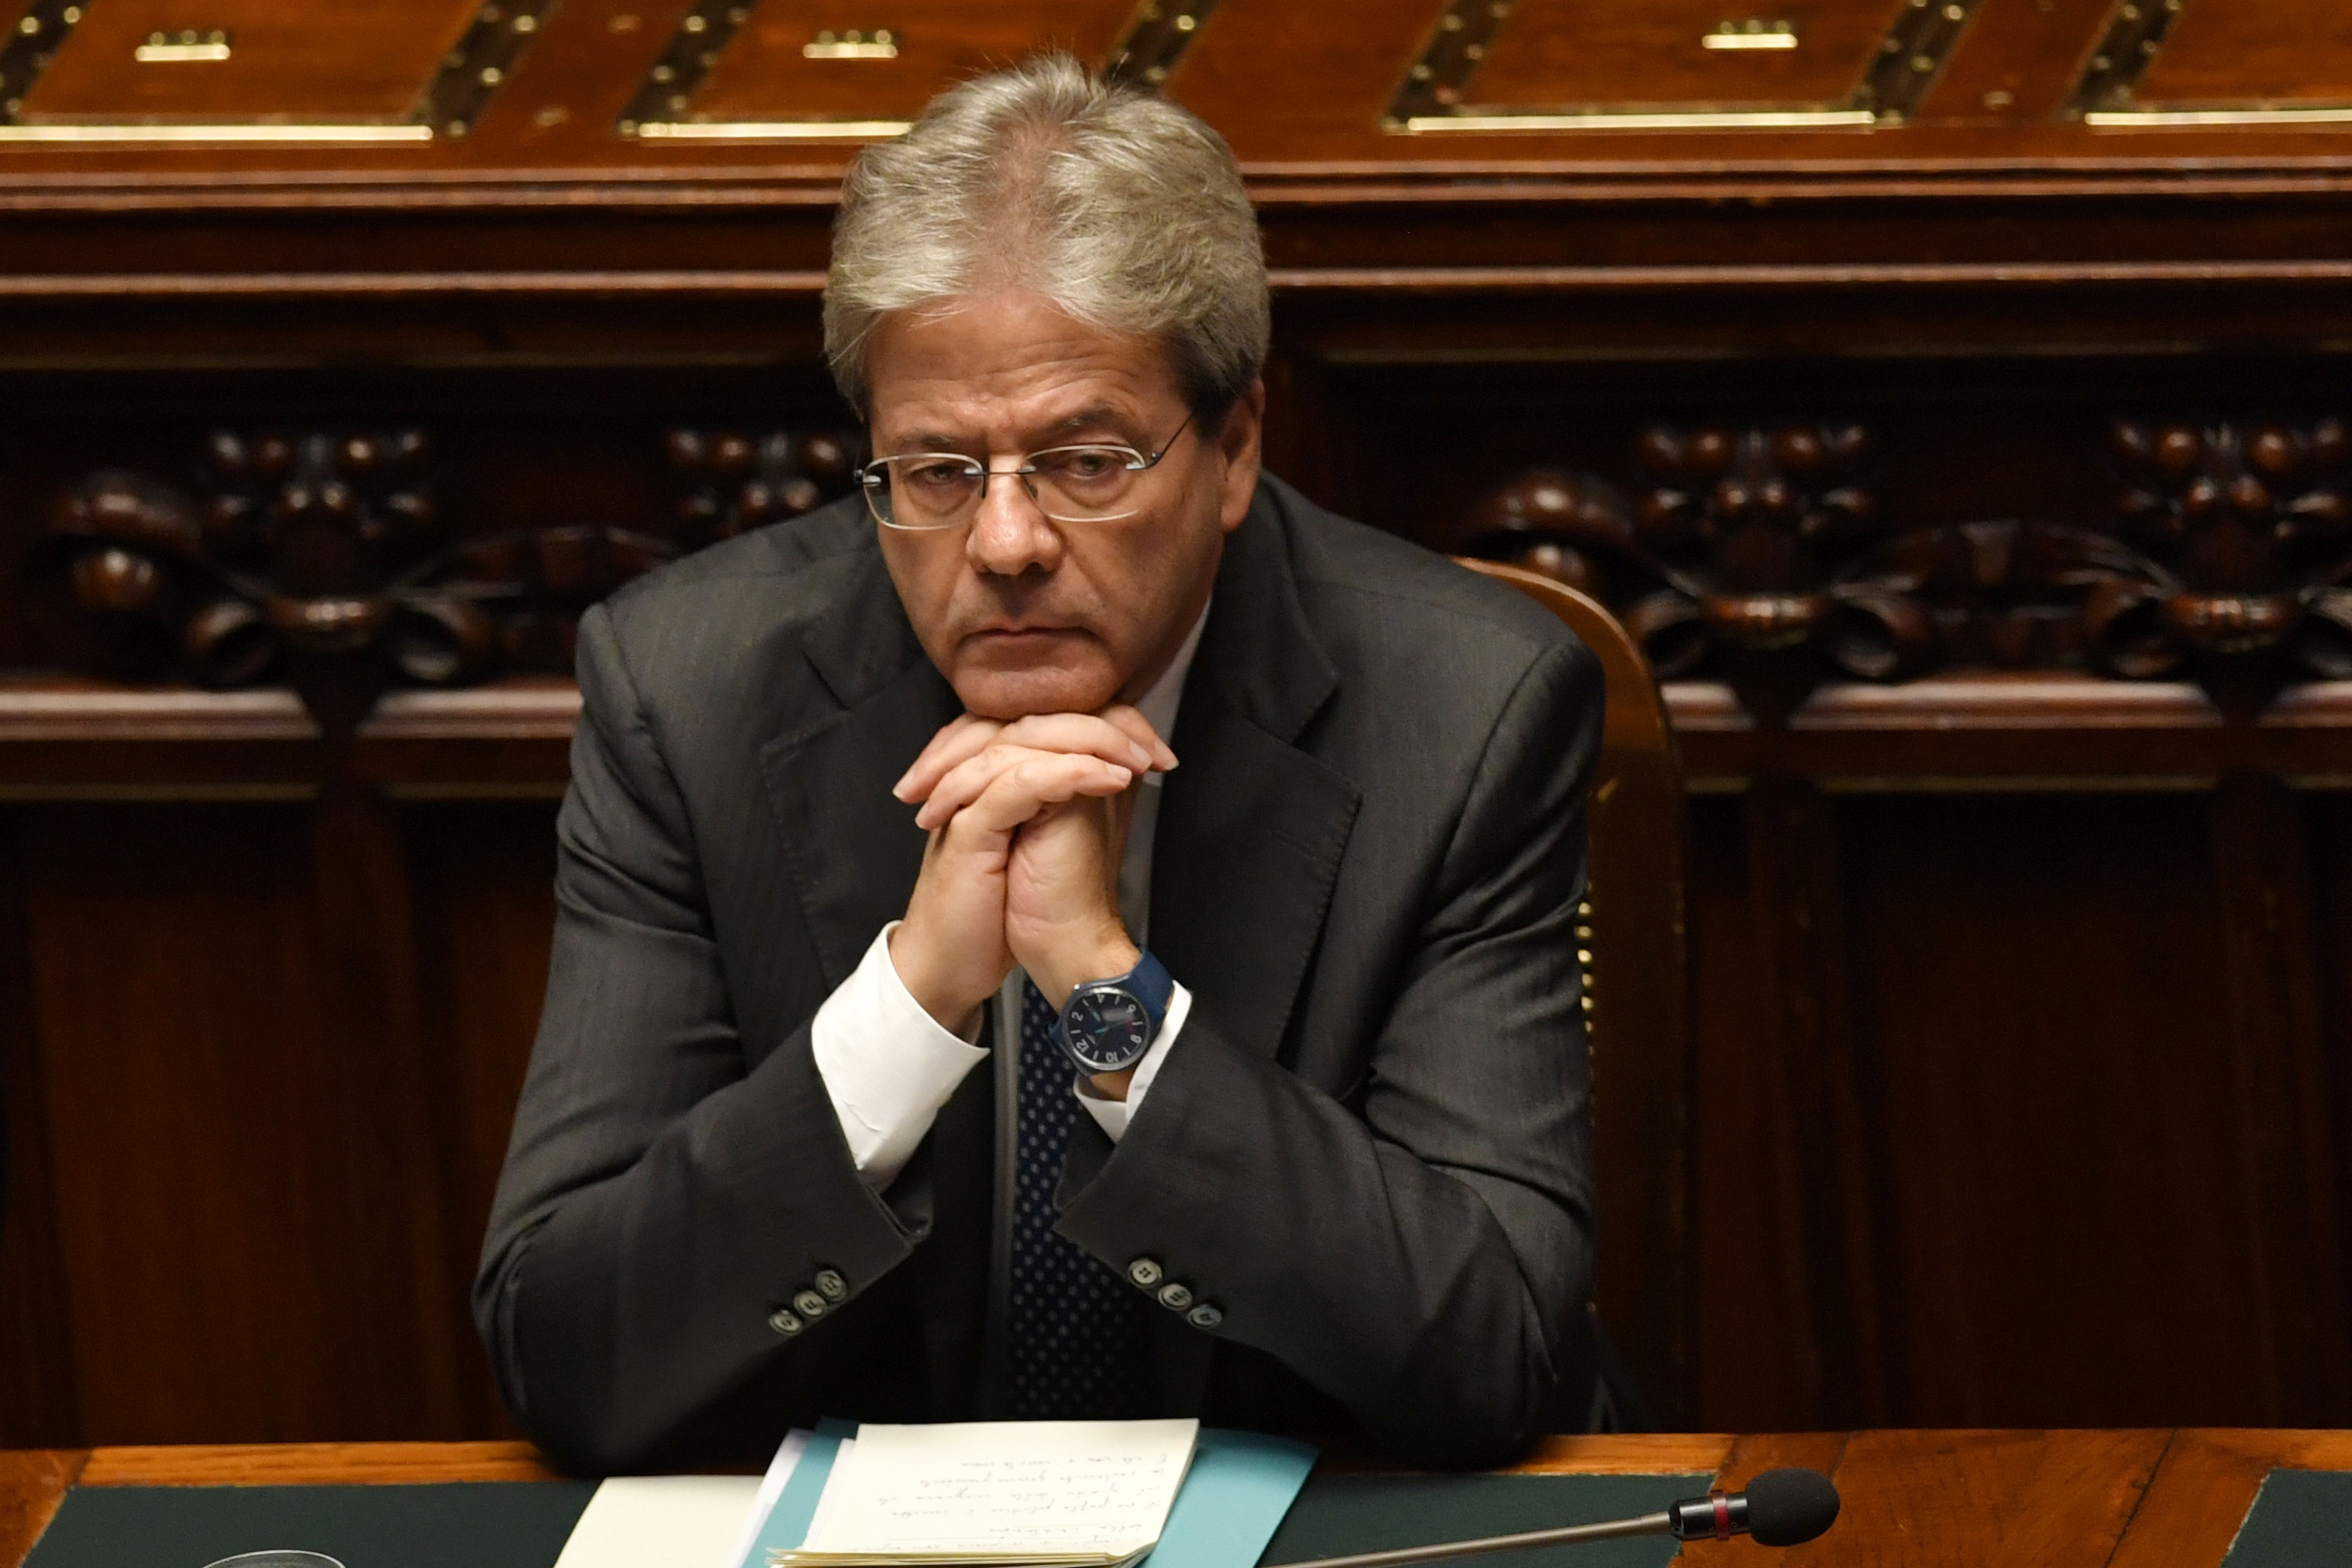 Italy's Prime Minister Paolo Gentiloni is pictured before a confidence vote to the new government on Dec. 13, 2016 at the Italian Chamber of Deputies in Rome. (ANDREAS SOLARO—AFP/Getty Images)